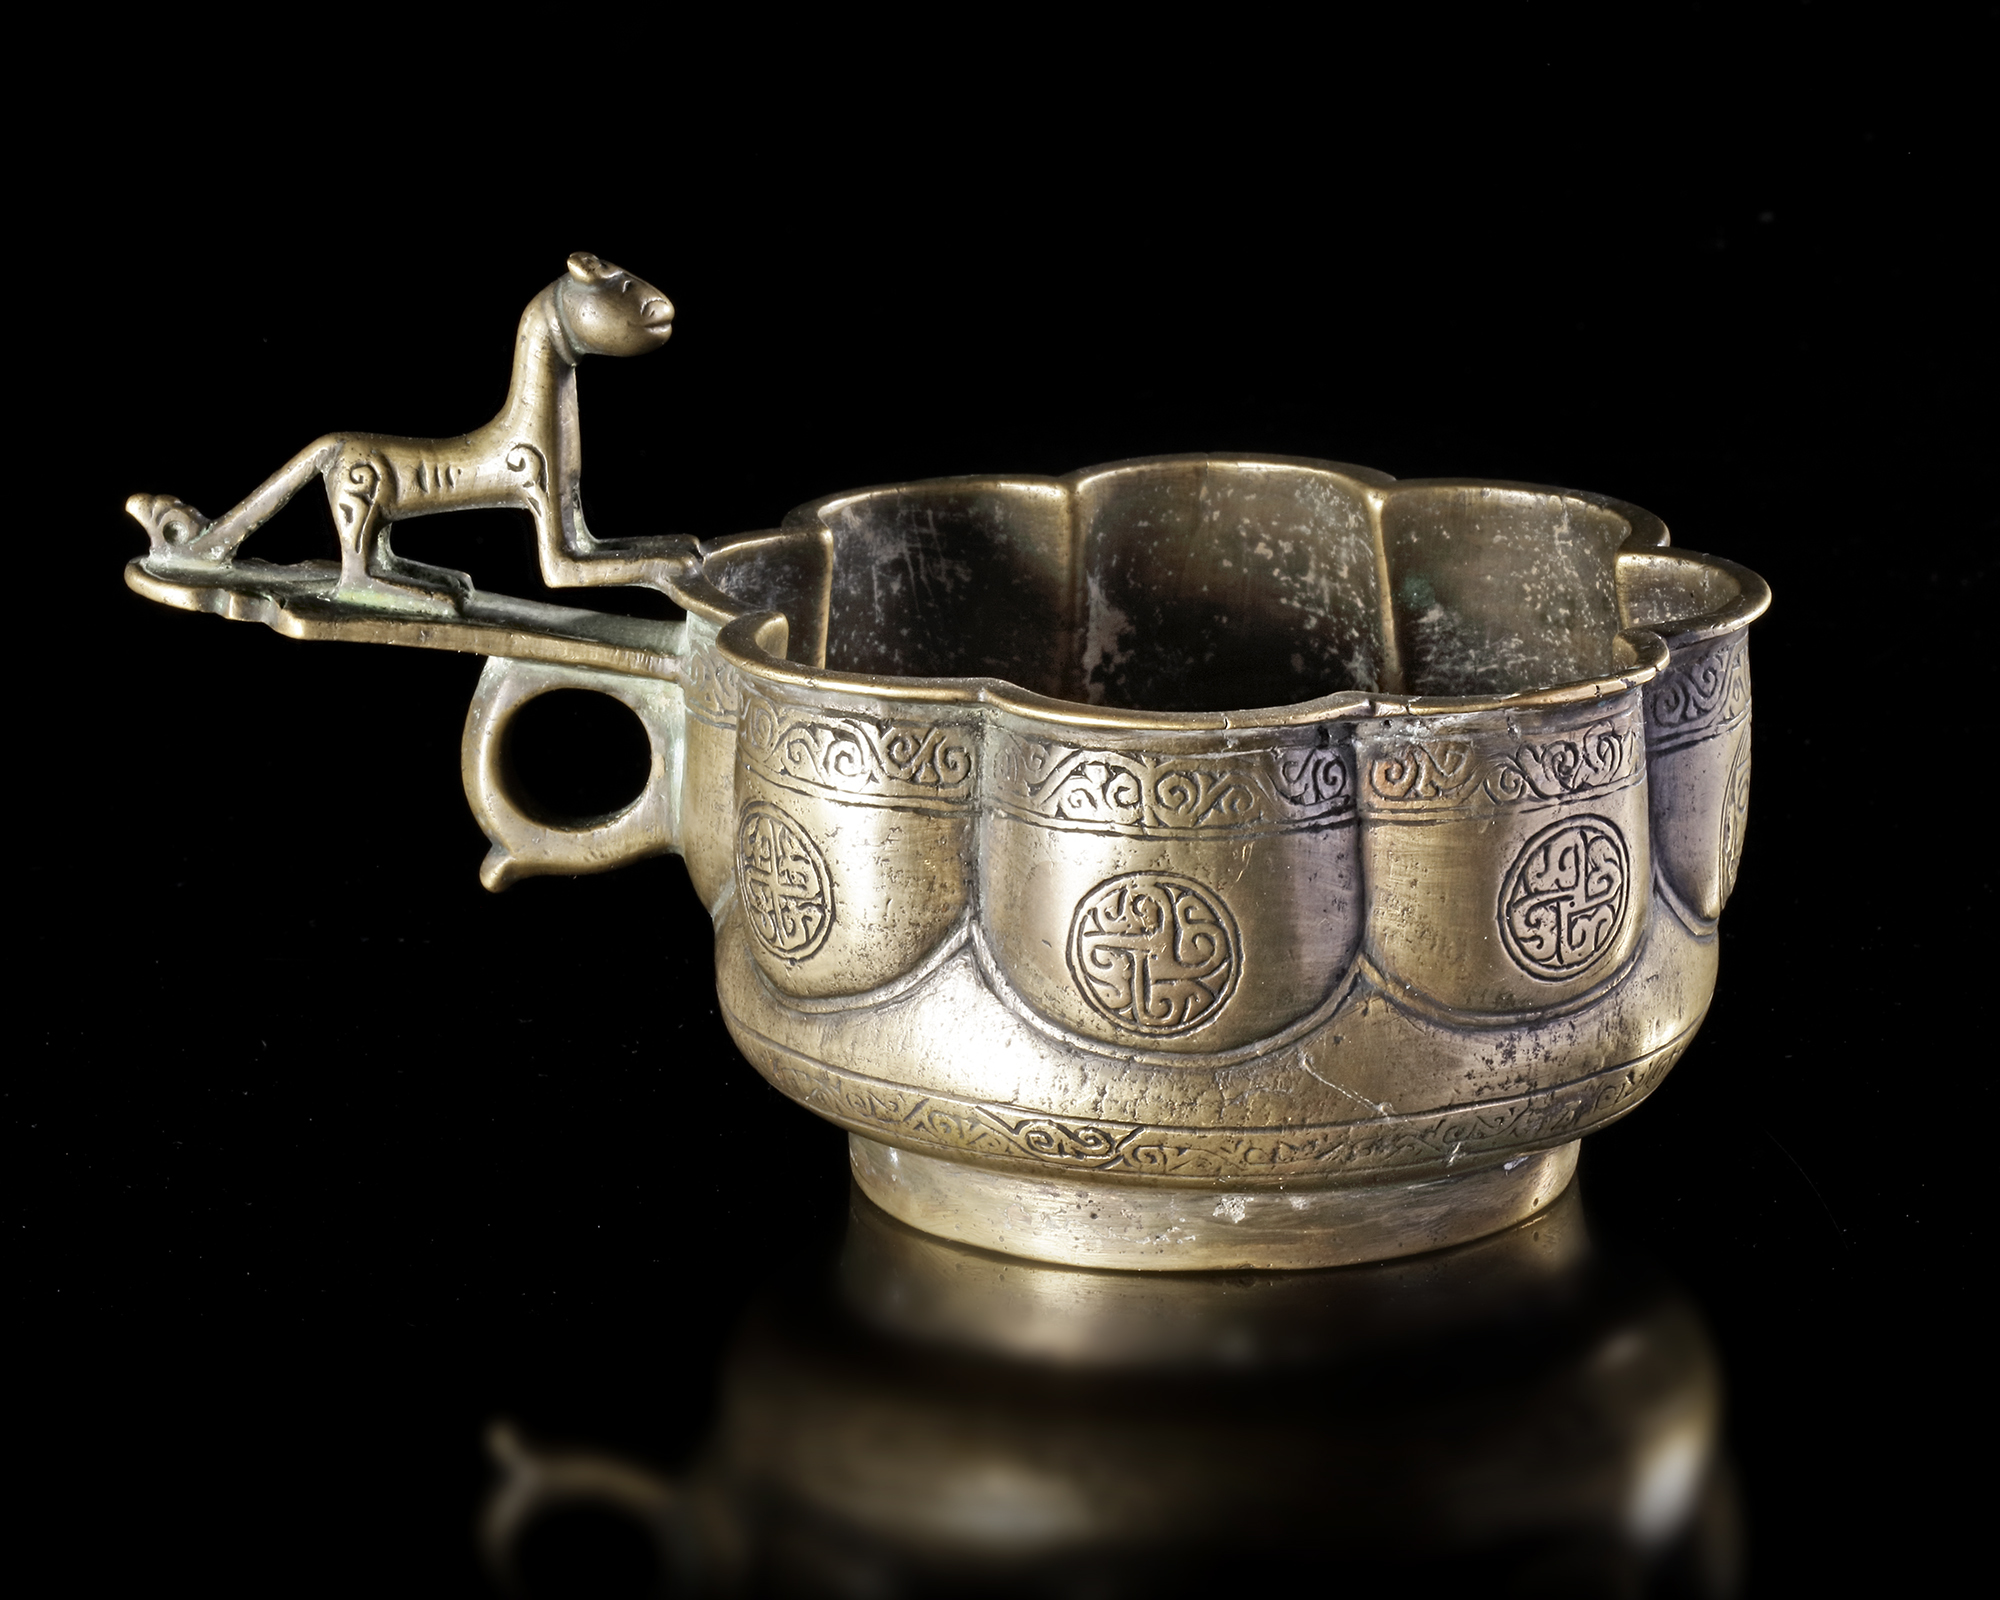 A BRONZE LOBED CUP, PERSIA, 11TH-12TH CENTURY - Image 4 of 8